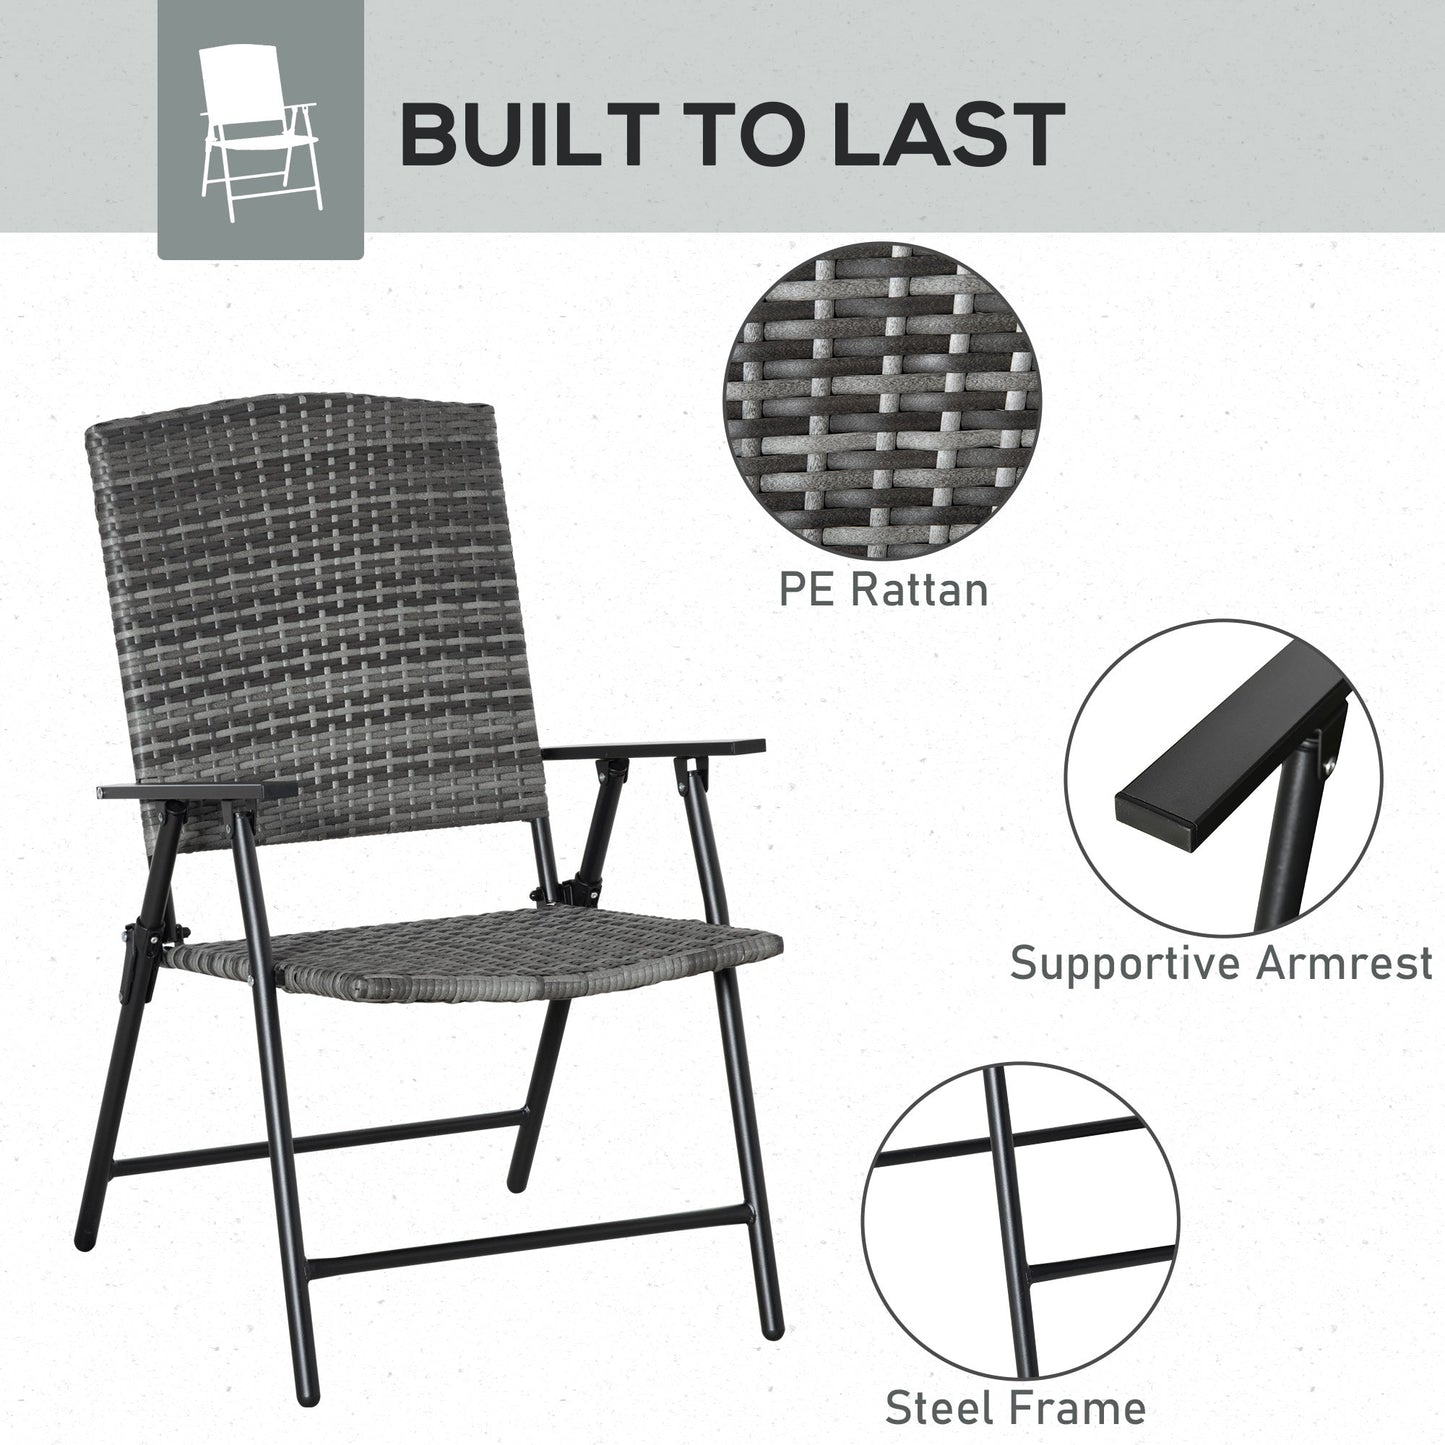 Outdoor and Garden-Wicker Patio Dining Chair Set of 4 with Folding Design, Outdoor Rattan Sling Chair Lawn Chair Set for Backyard Wedding Party, Mixed Grey - Outdoor Style Company